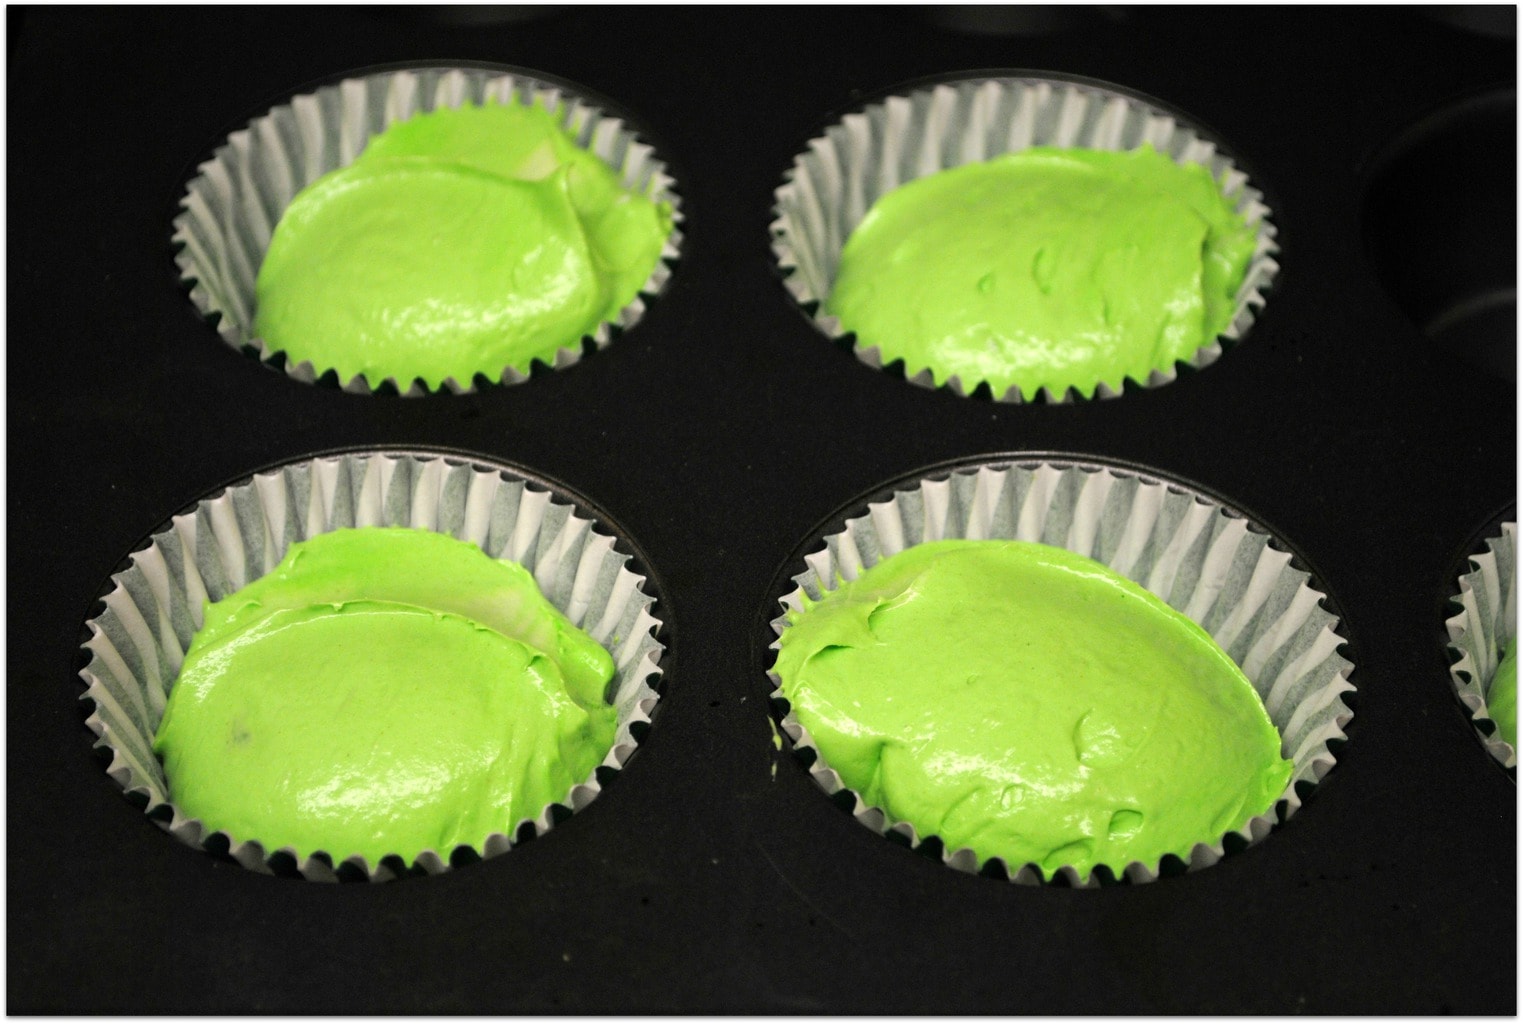 These Shamrock Shake Cupcakes are just too cute and so delicious. Think Thin Mints in a cupcake! As I've said before, cupcakes are my favorite dessert, and if it's an easy recipes, even better! Are you doing anything special for your family for St. Patrick's Day? Make these cupcakes for a special surprise! 